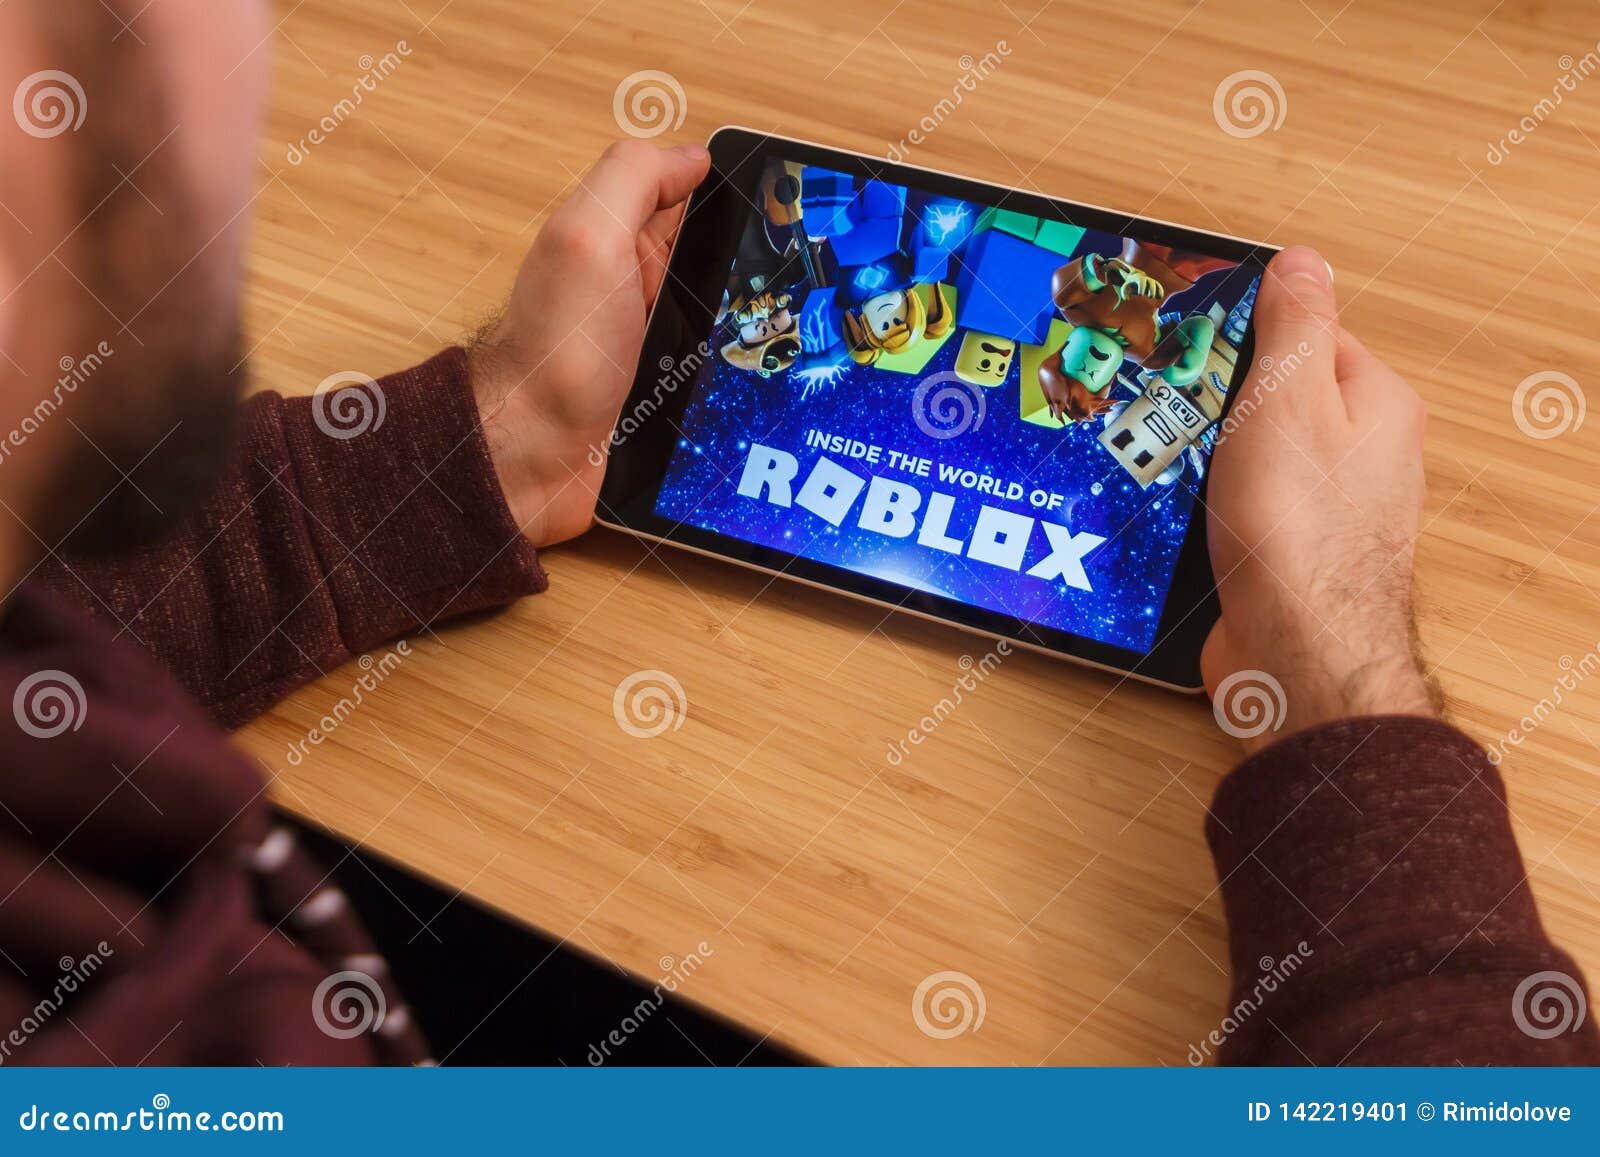 Prague Czech Republic March 16 2019 Man Holding A Smartphone And Playng The Roblox Mobile Game An Illustrative Editorial Editorial Photo Image Of Application Editorial 142219401 - march roblox event 2019